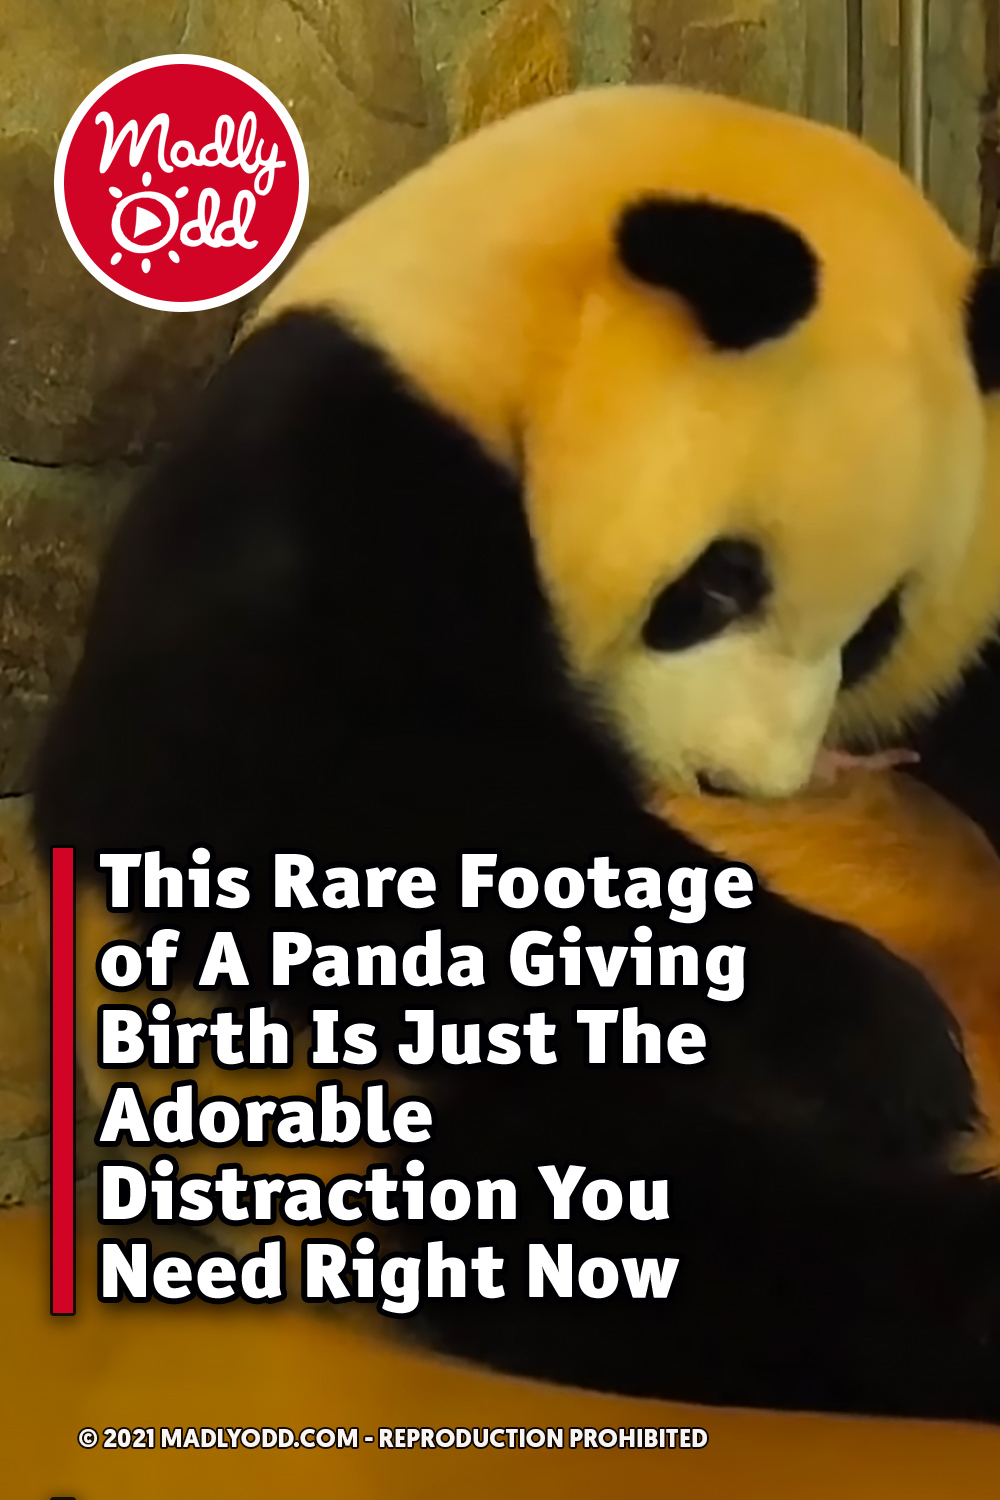 This Rare Footage of A Panda Giving Birth Is Just The Adorable Distraction You Need Right Now